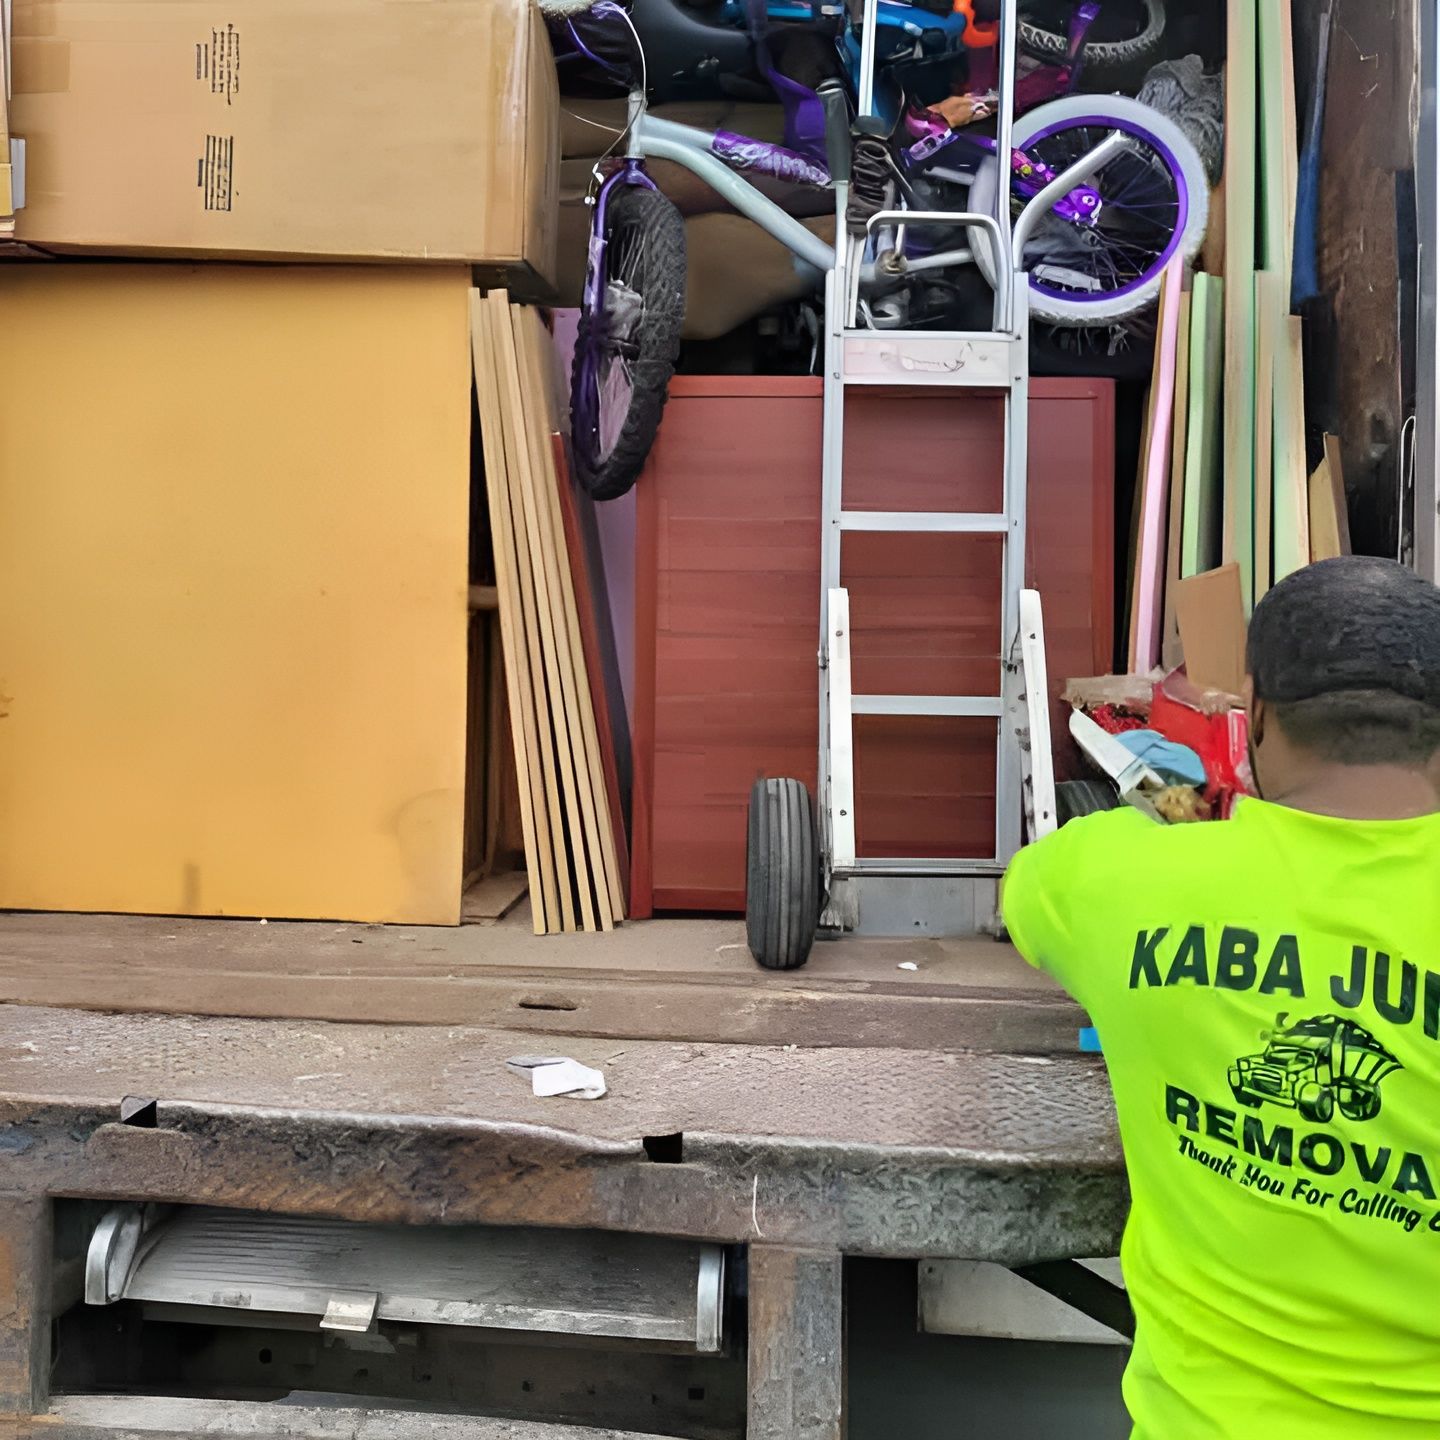 A man in a neon green kaba junk removal shirt is loading a truck with boxes and a ladder.